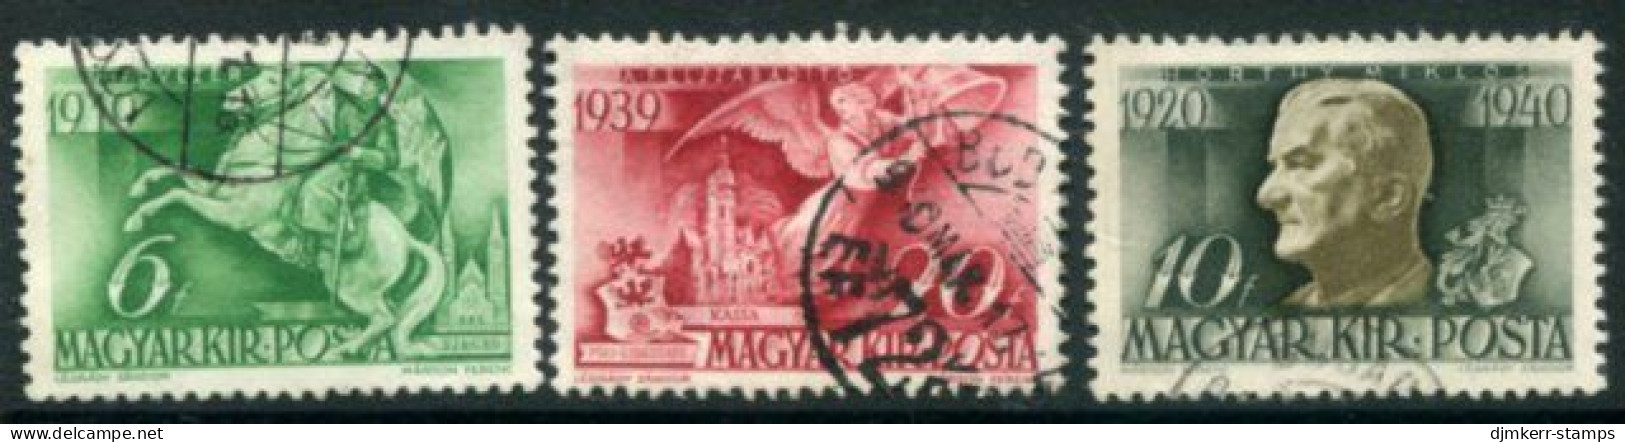 HUNGARY 1940 20th Anniversary Of Horthy Regime Used.  Michel 626-28 - Used Stamps